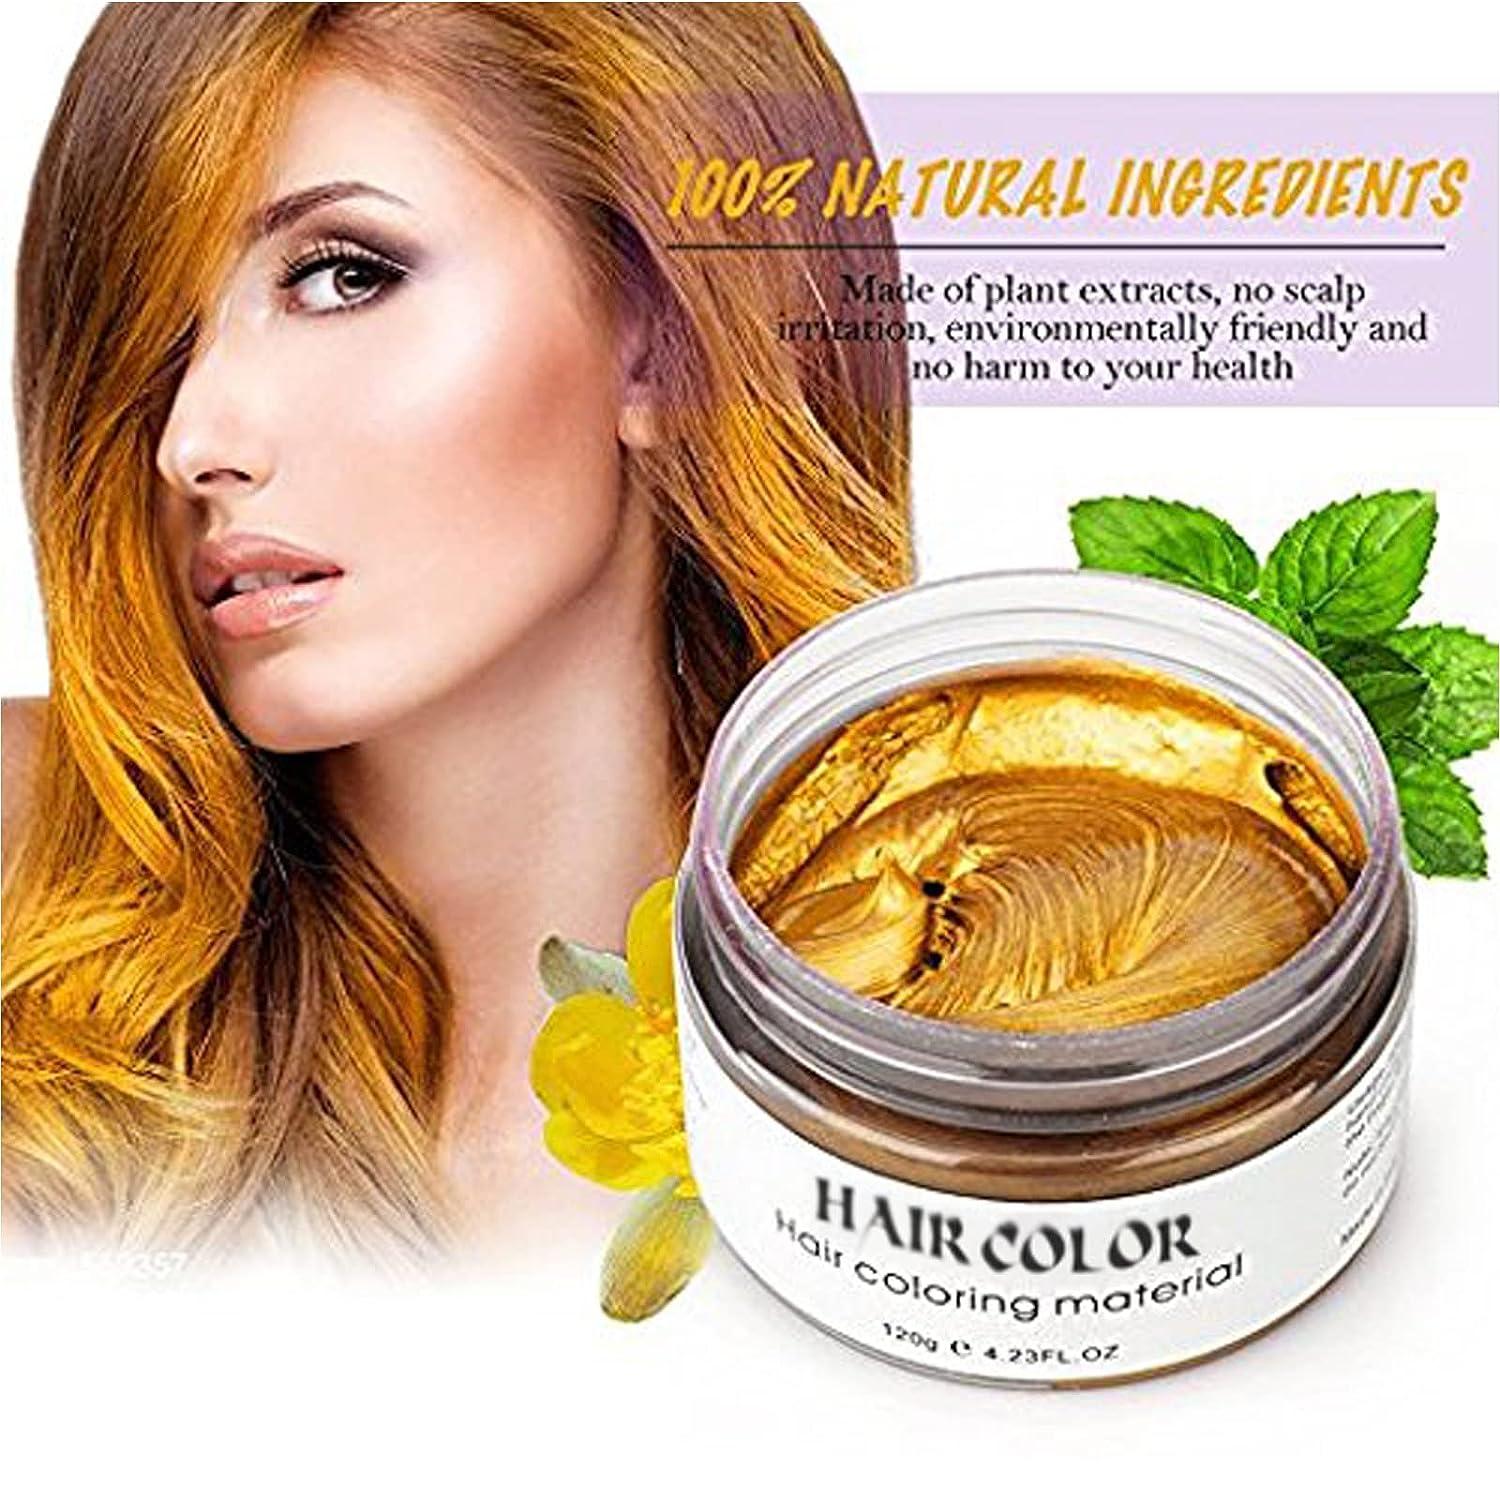 Red Temporary Hair Color Wax Dye Acosexy Fashion Colorful Kids Hair Spray Wax  Dye Pomades Disposable Natural Hair Strong Style Gel Cream Hair Dye Instant  Hairstyle Mud Cream for Party Cosplay Masquerade